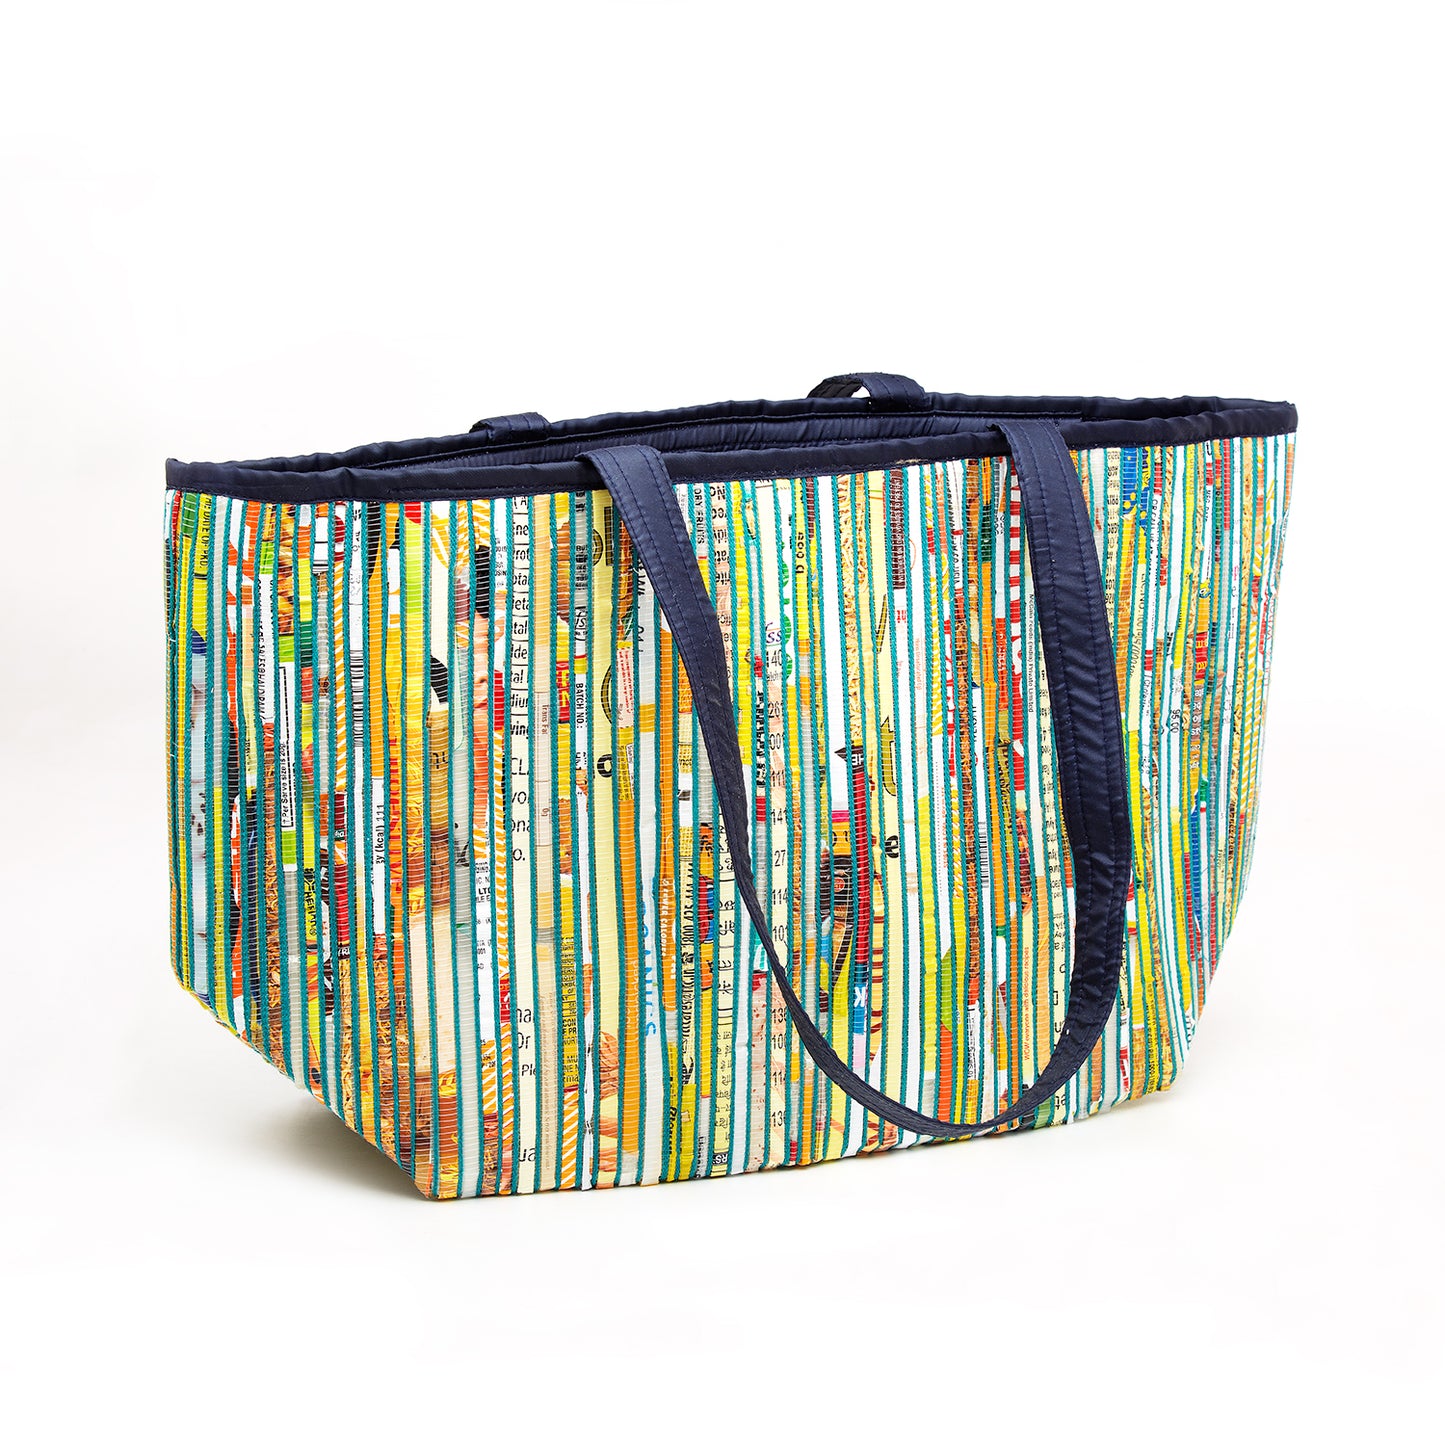 Multi - Colored Recycled Plastic Tote bag (Multi Layered Packing)